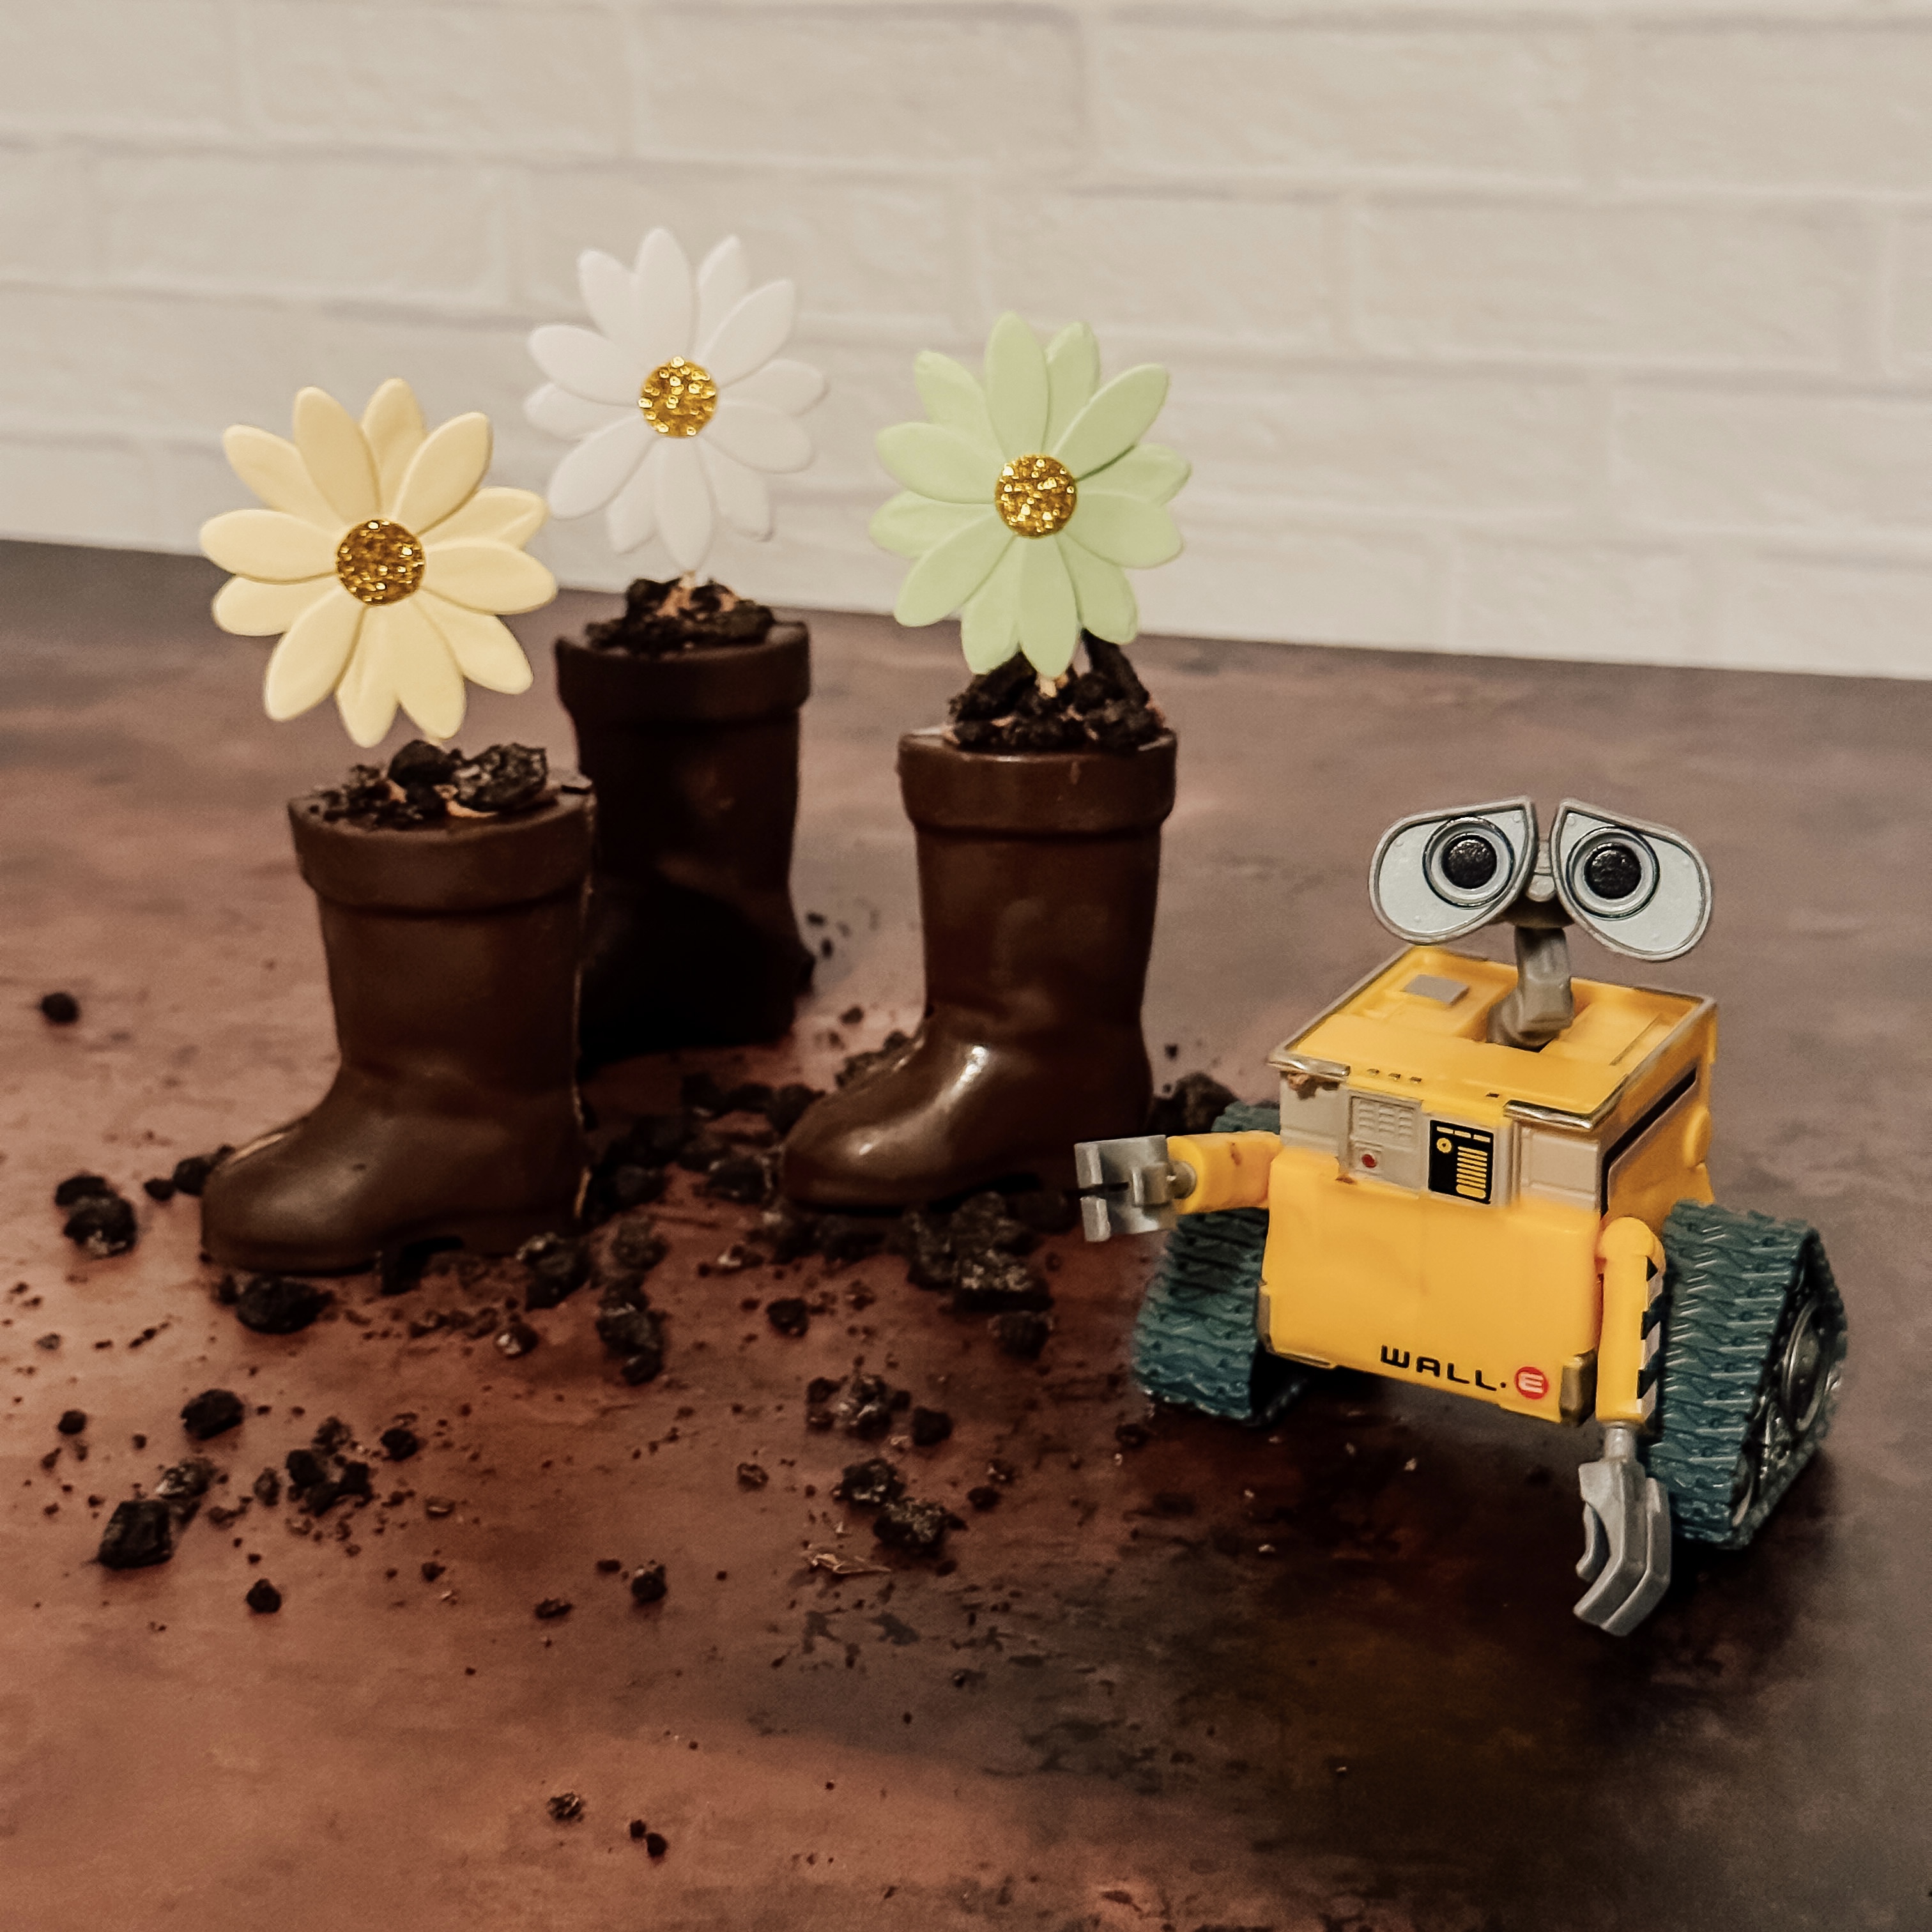 WALL-E's Chocolate Mousse Boots (three chocolate boots filled with chocolate mousse and topped with oreo crumbs and a flower).